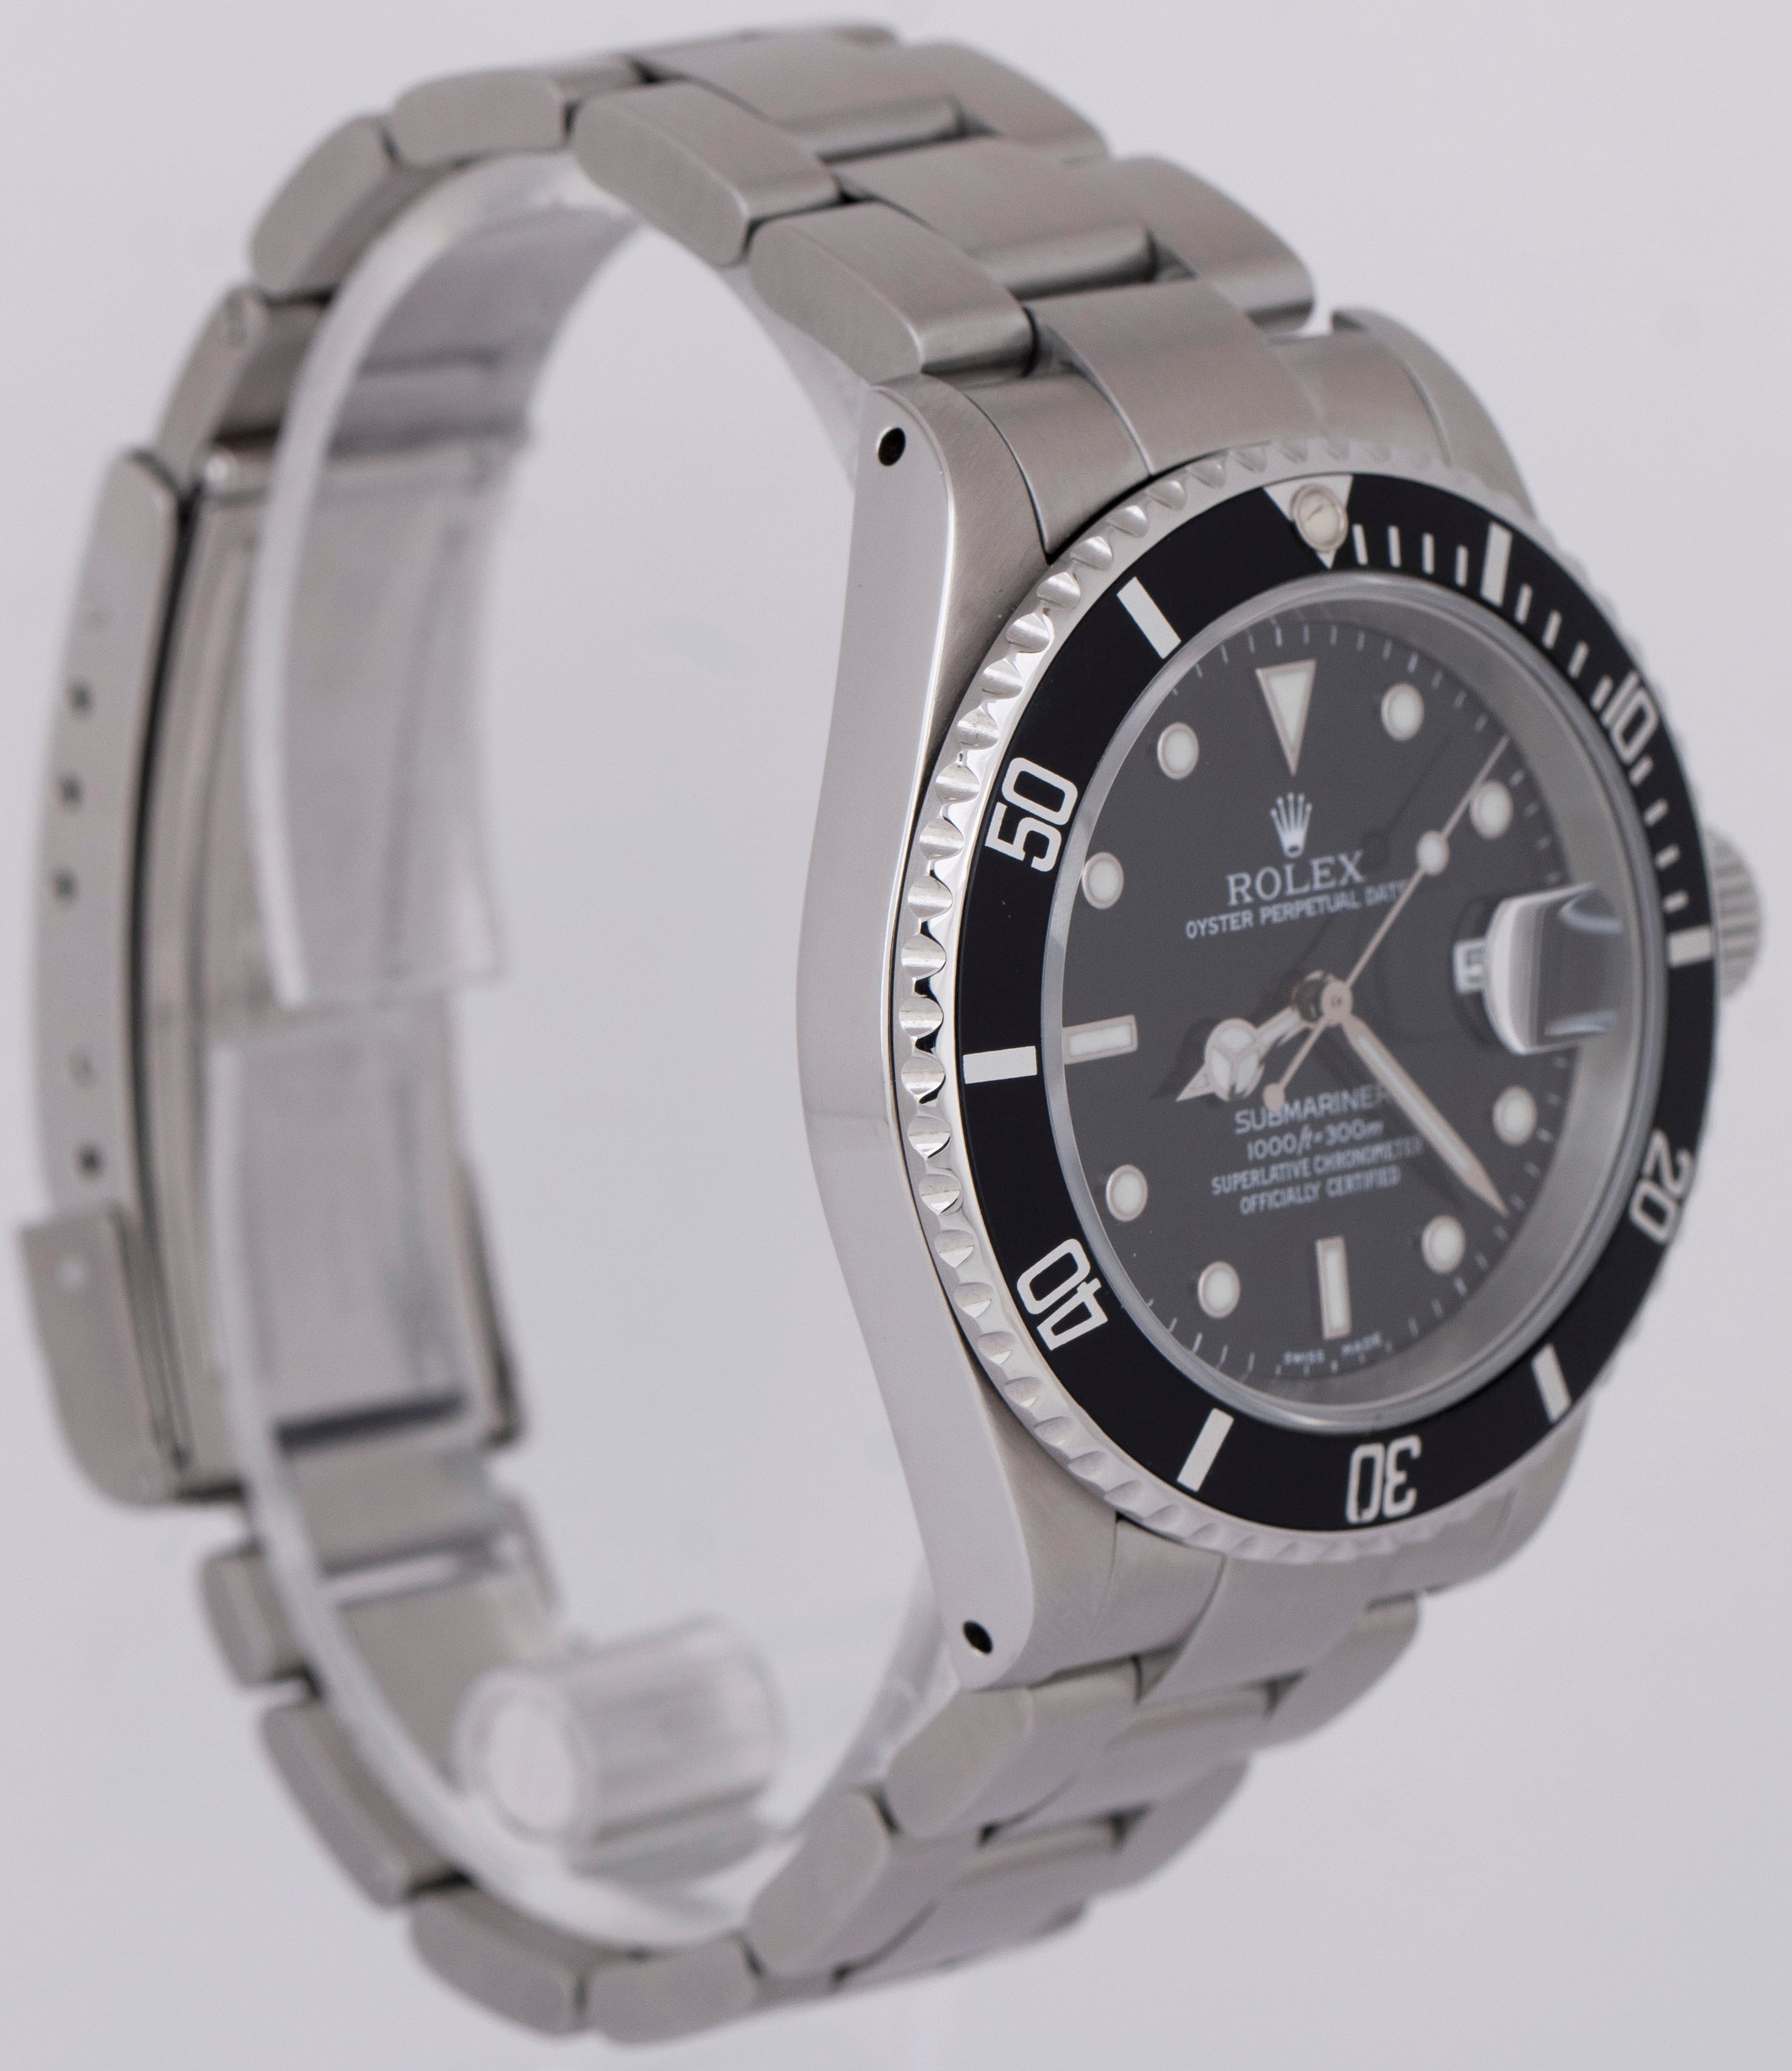 MINT Rolex Submariner Date 40mm Black Stainless Steel Automatic Watch 16610